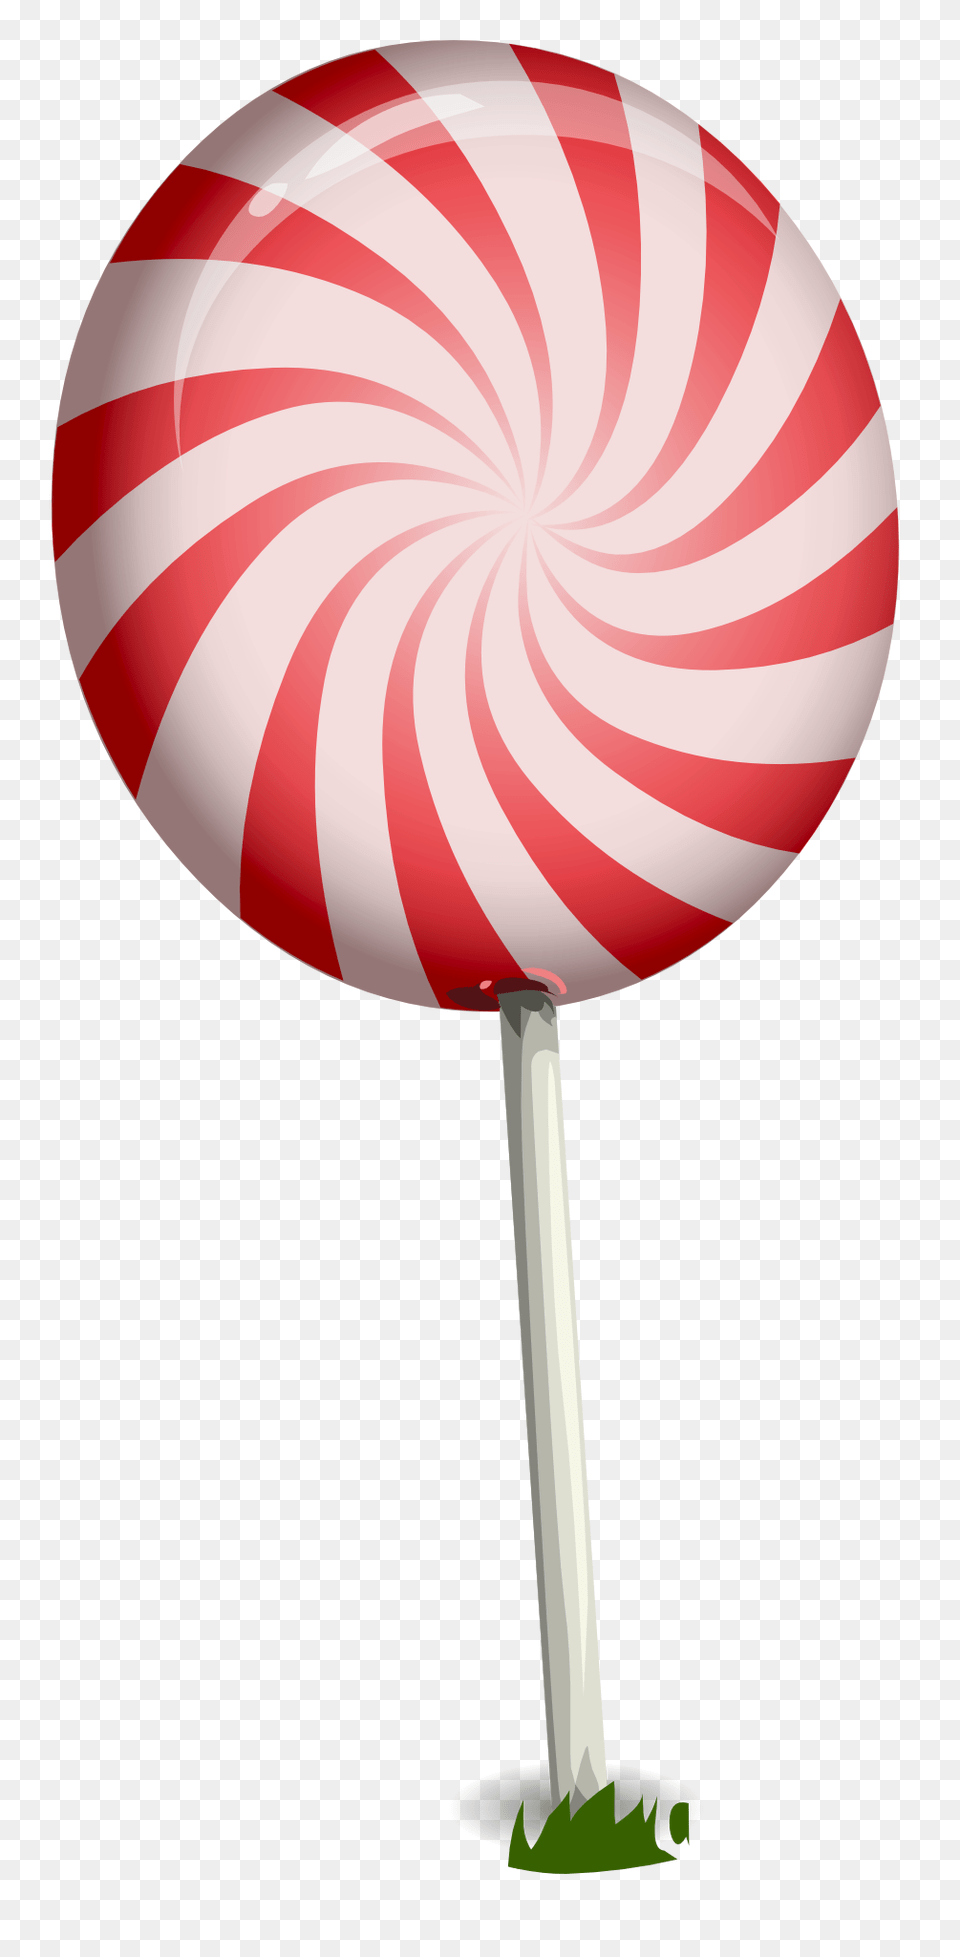 Pngpix Com Candy Lollipop Image, Food, Sweets, Appliance, Blow Dryer Free Png Download